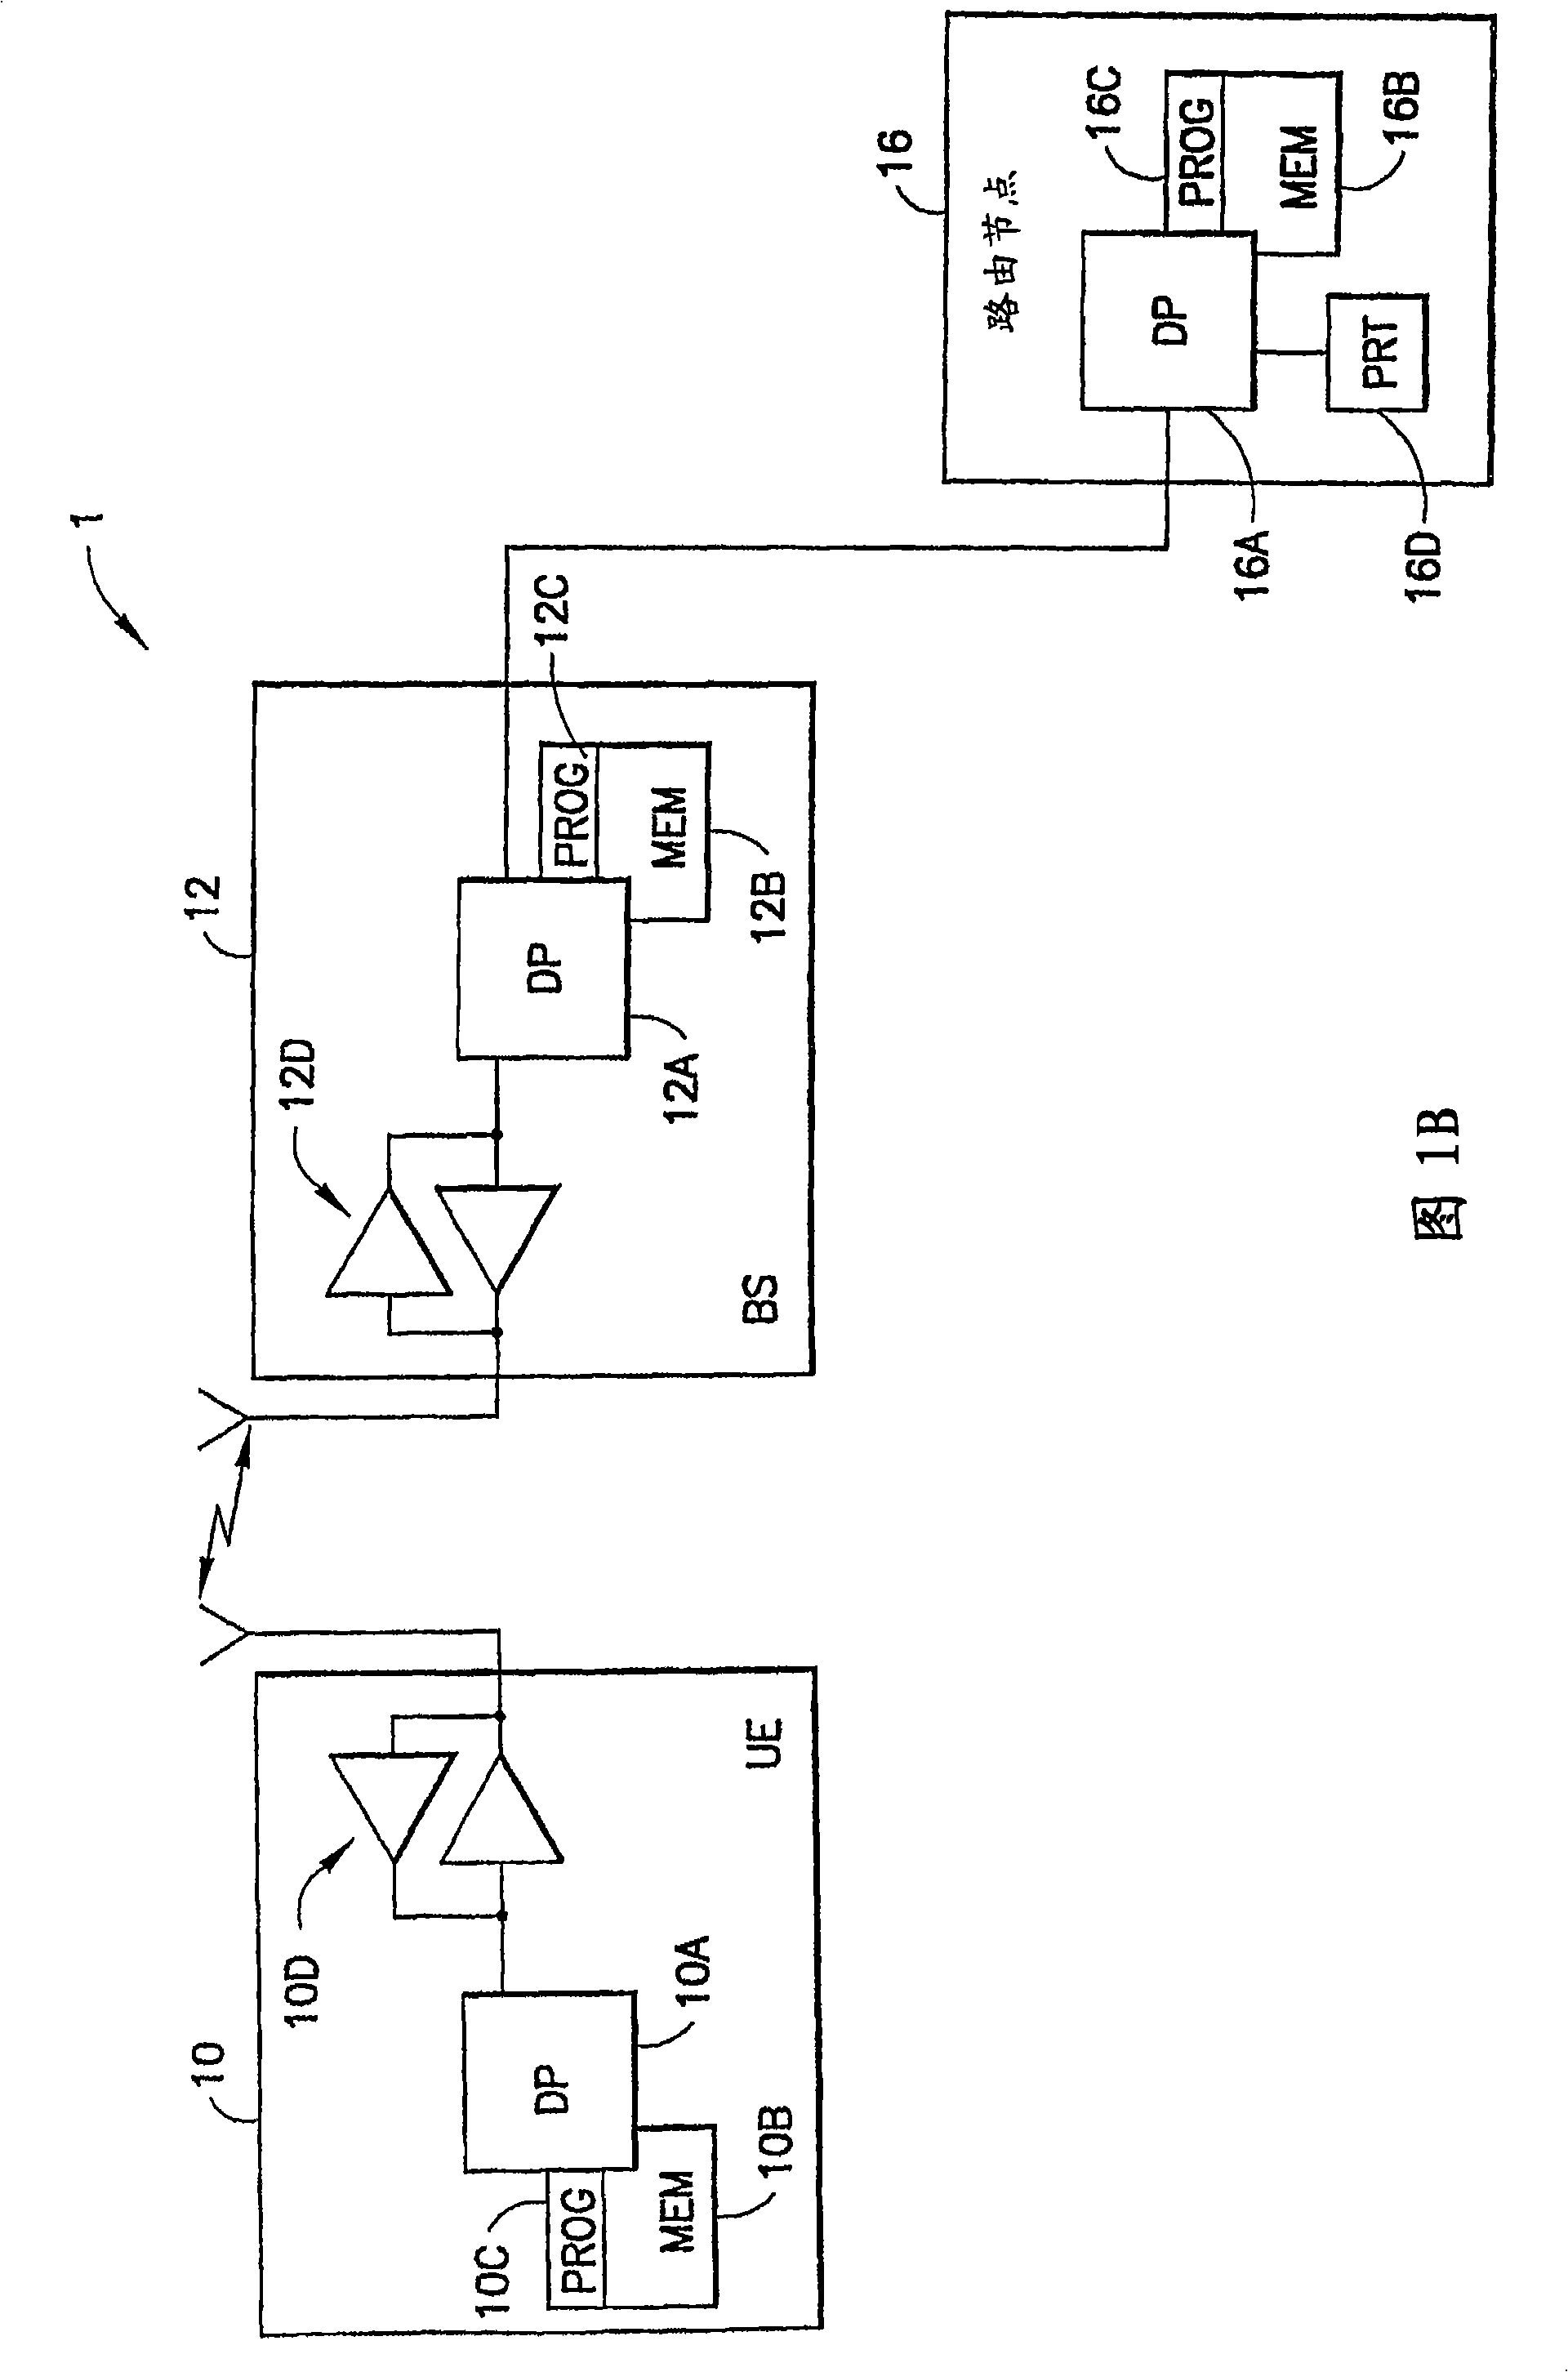 Apparatus, method and computer program product to configure a radio link protocol for internet protocol flow